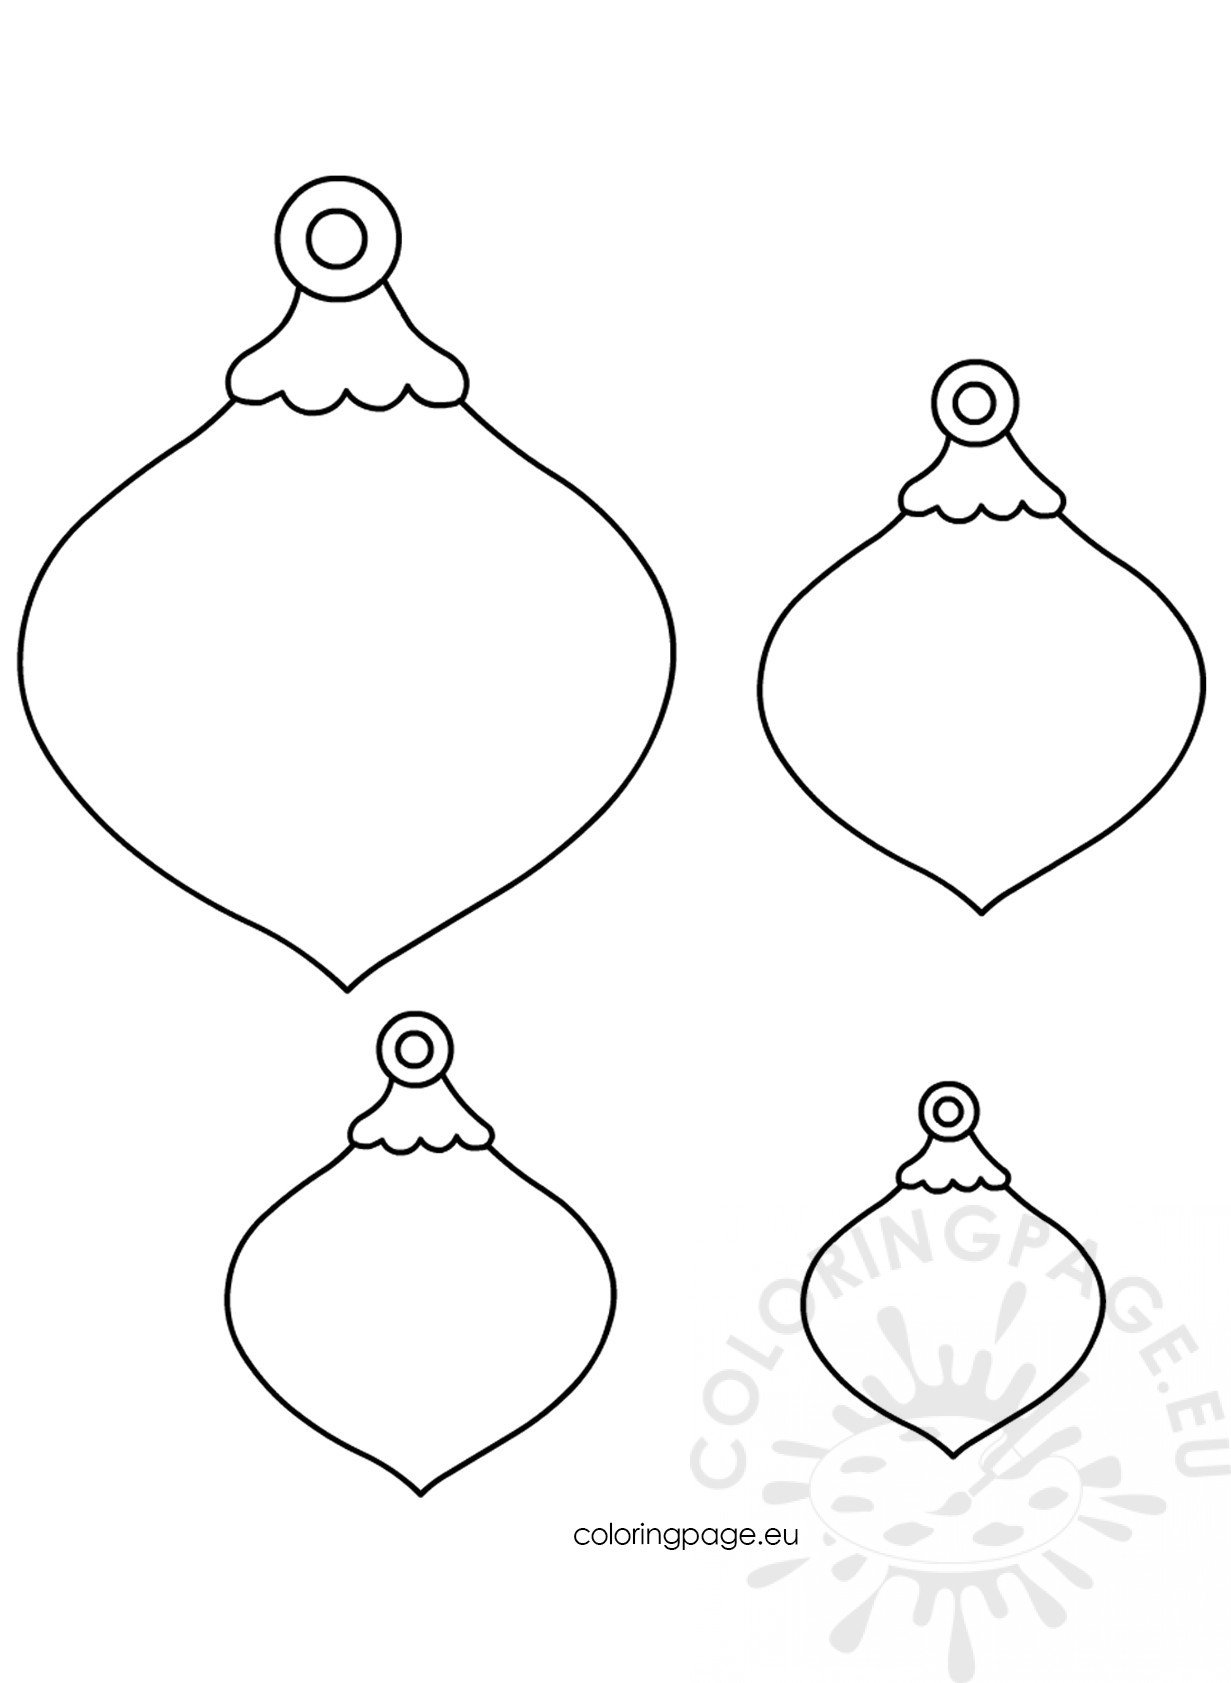 Christmas Felt Ornaments Patterns Coloring Page